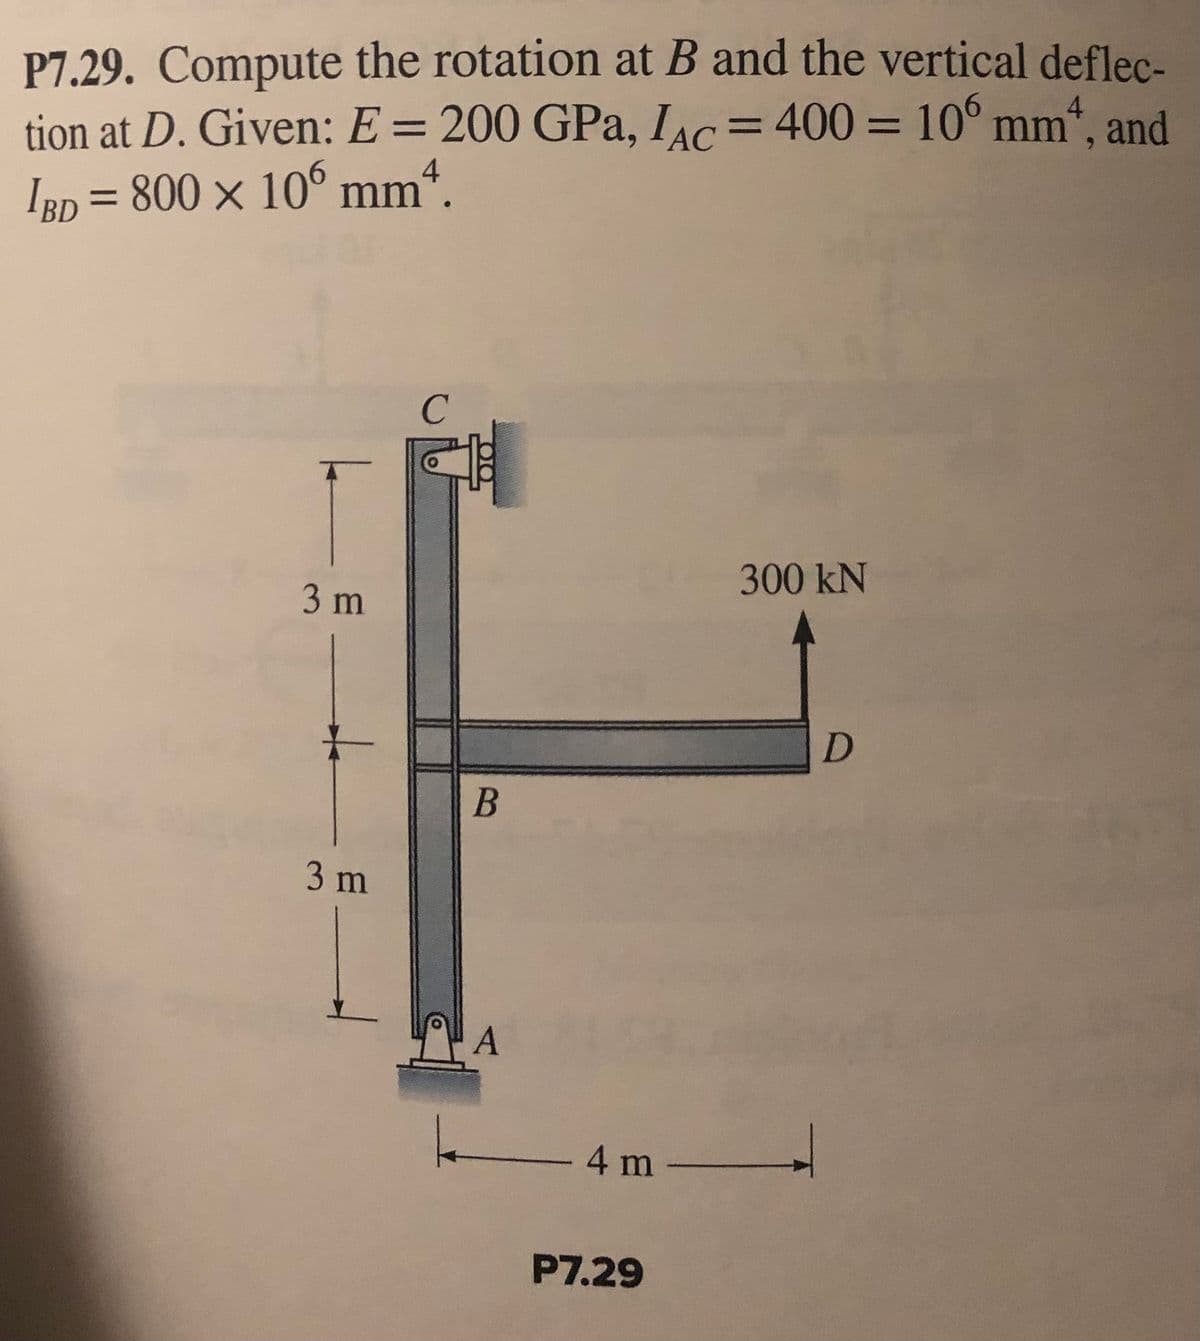 P7.29. Compute the rotation at B and the vertical deflec-
tion at D. Given: E = 200 GPa, IAC= 400 = 10° mm“, and
IBD = 800 × 10° mm“.
%3D
%3D
%3D
%3D
300 kN
3 m
3 m
4 m -
P7.29
